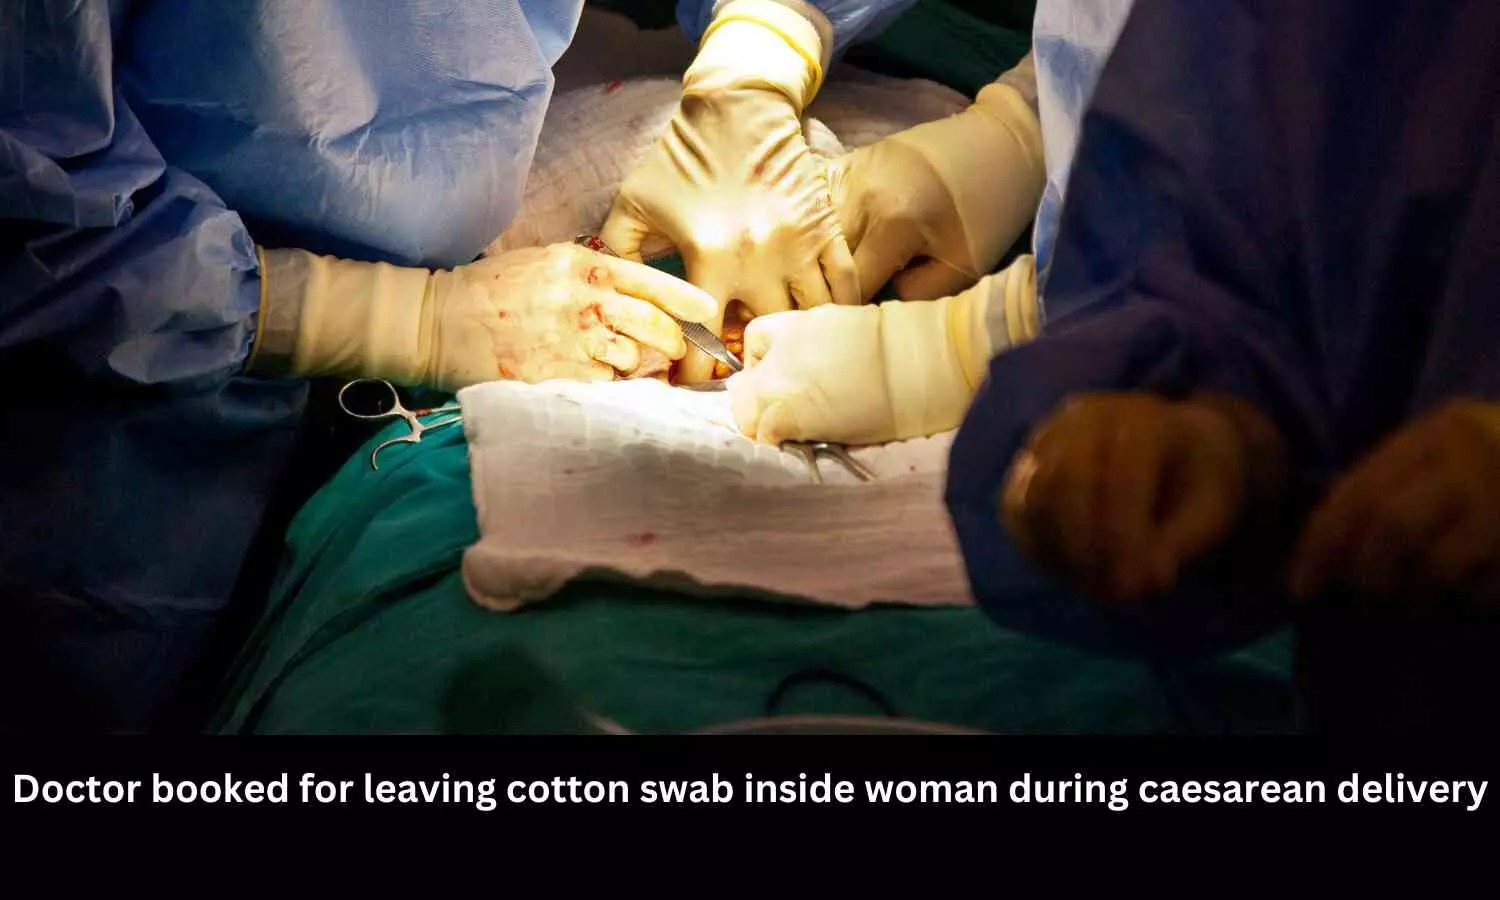 Doctor allegedly leaves cotton swab inside woman during caesarean delivery, booked